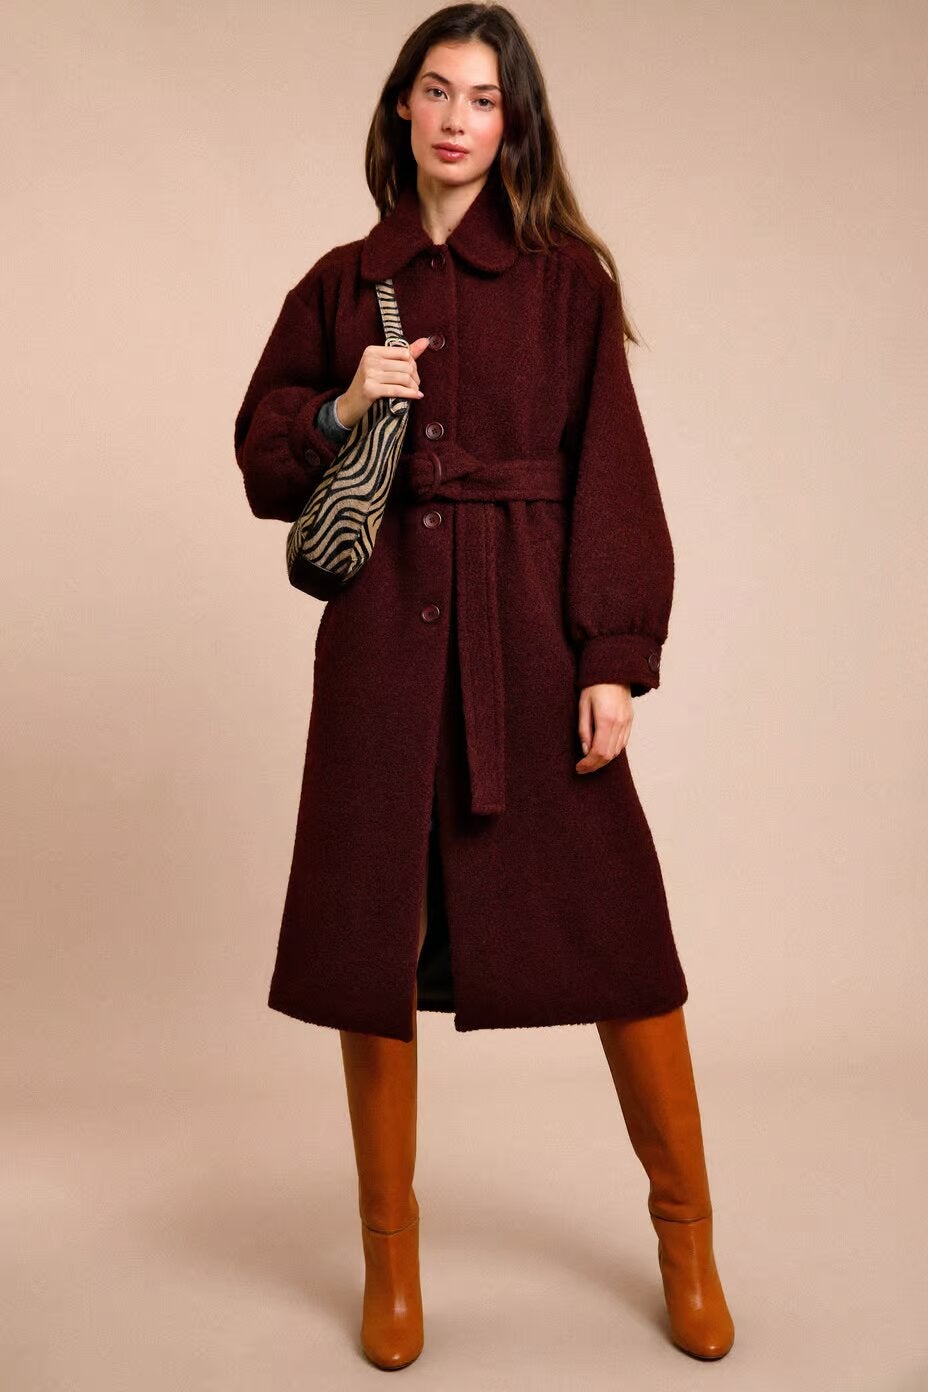 20 Perfectly Petite Coats For The Cold Weather